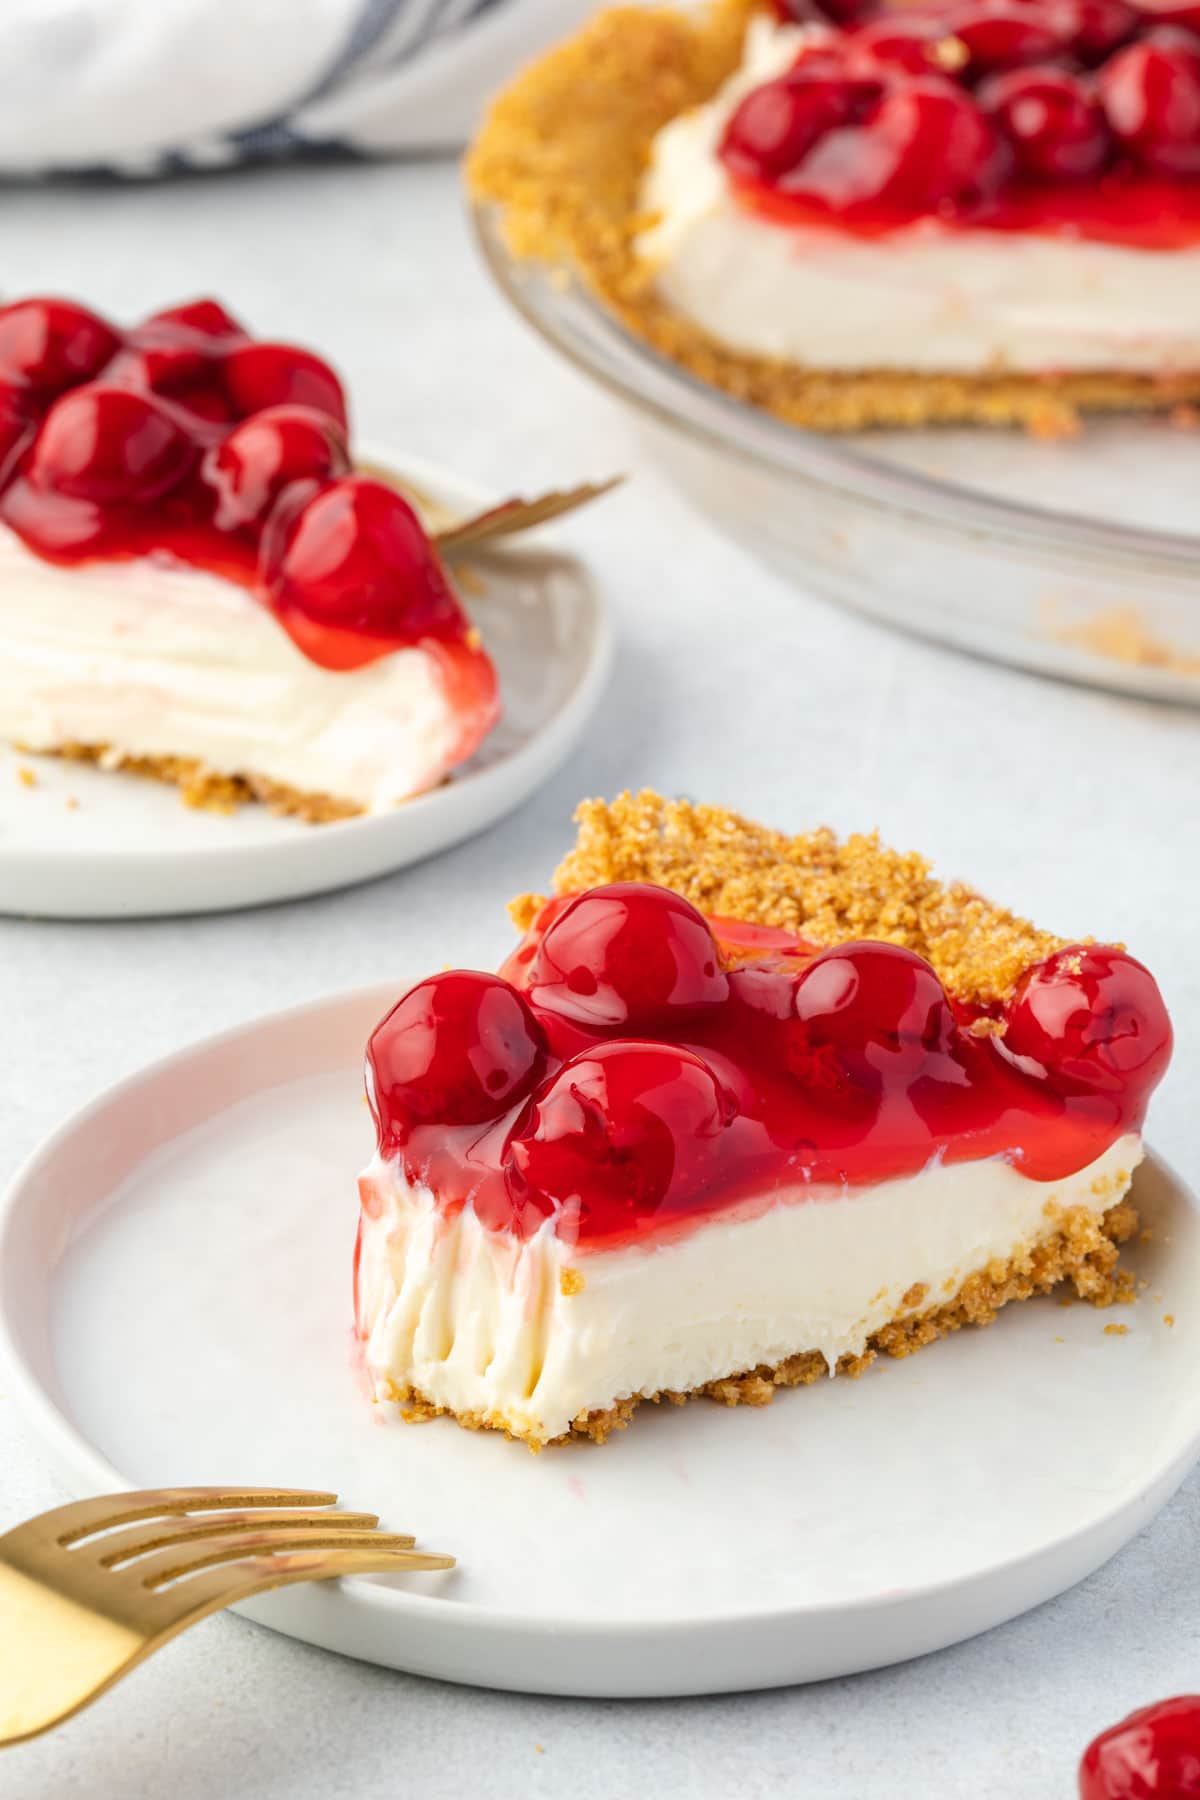 Slice of cherry cheesecake pie with a bite out of it, and another slice & remaining pie in background.